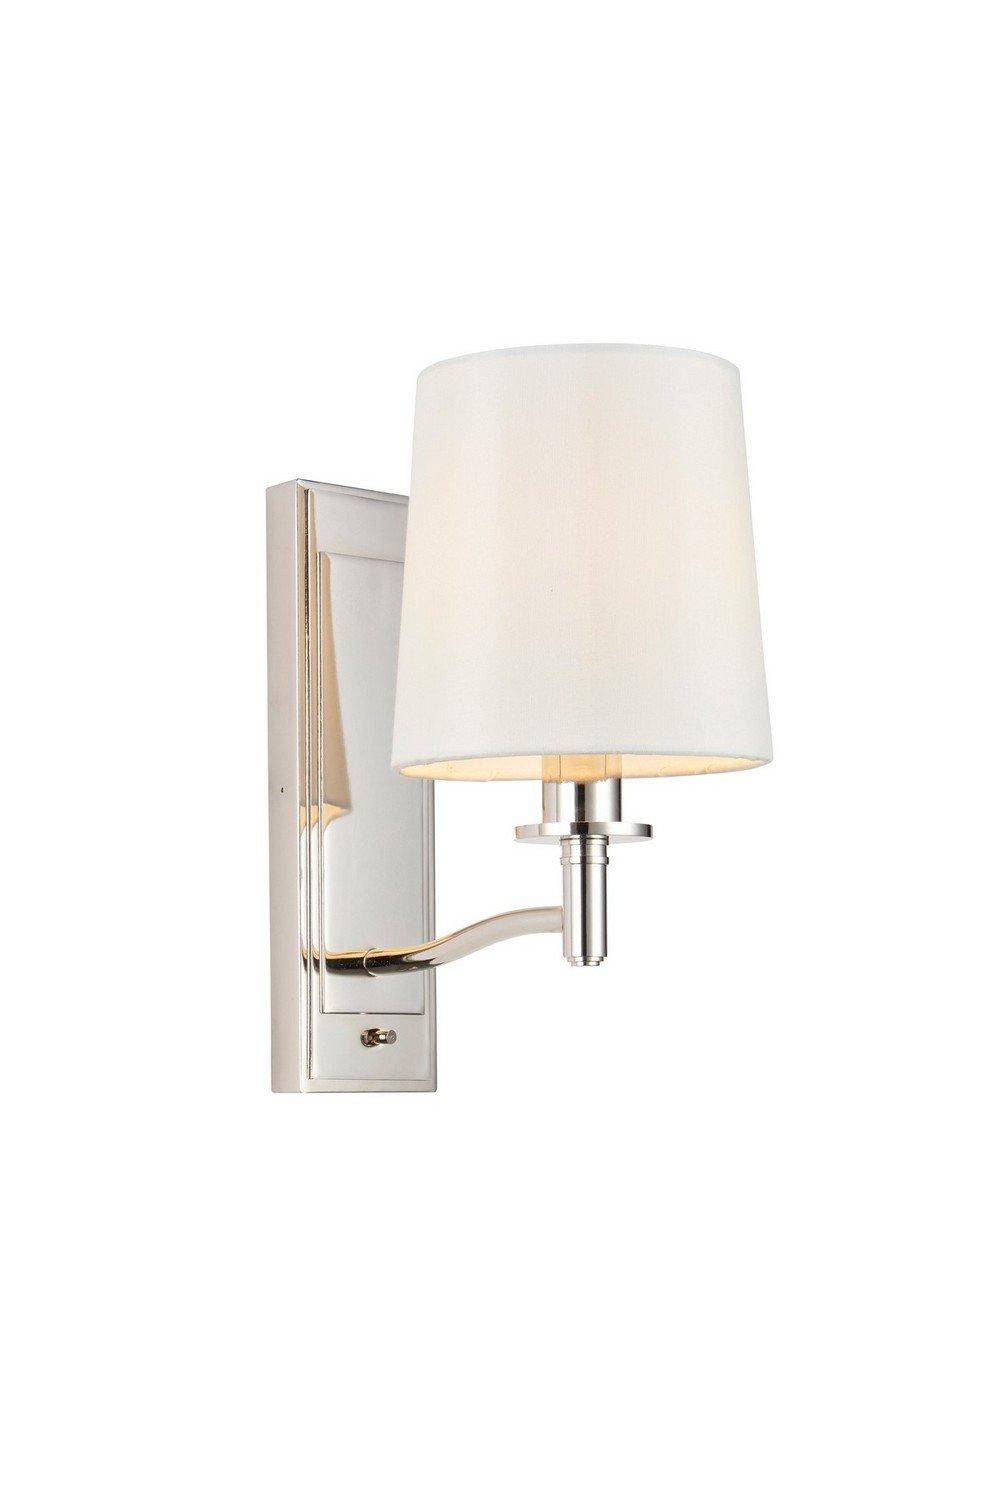 Ortona Vintage Wall Lamp Bright Nickel White Fabric Shades with Toggle Switch